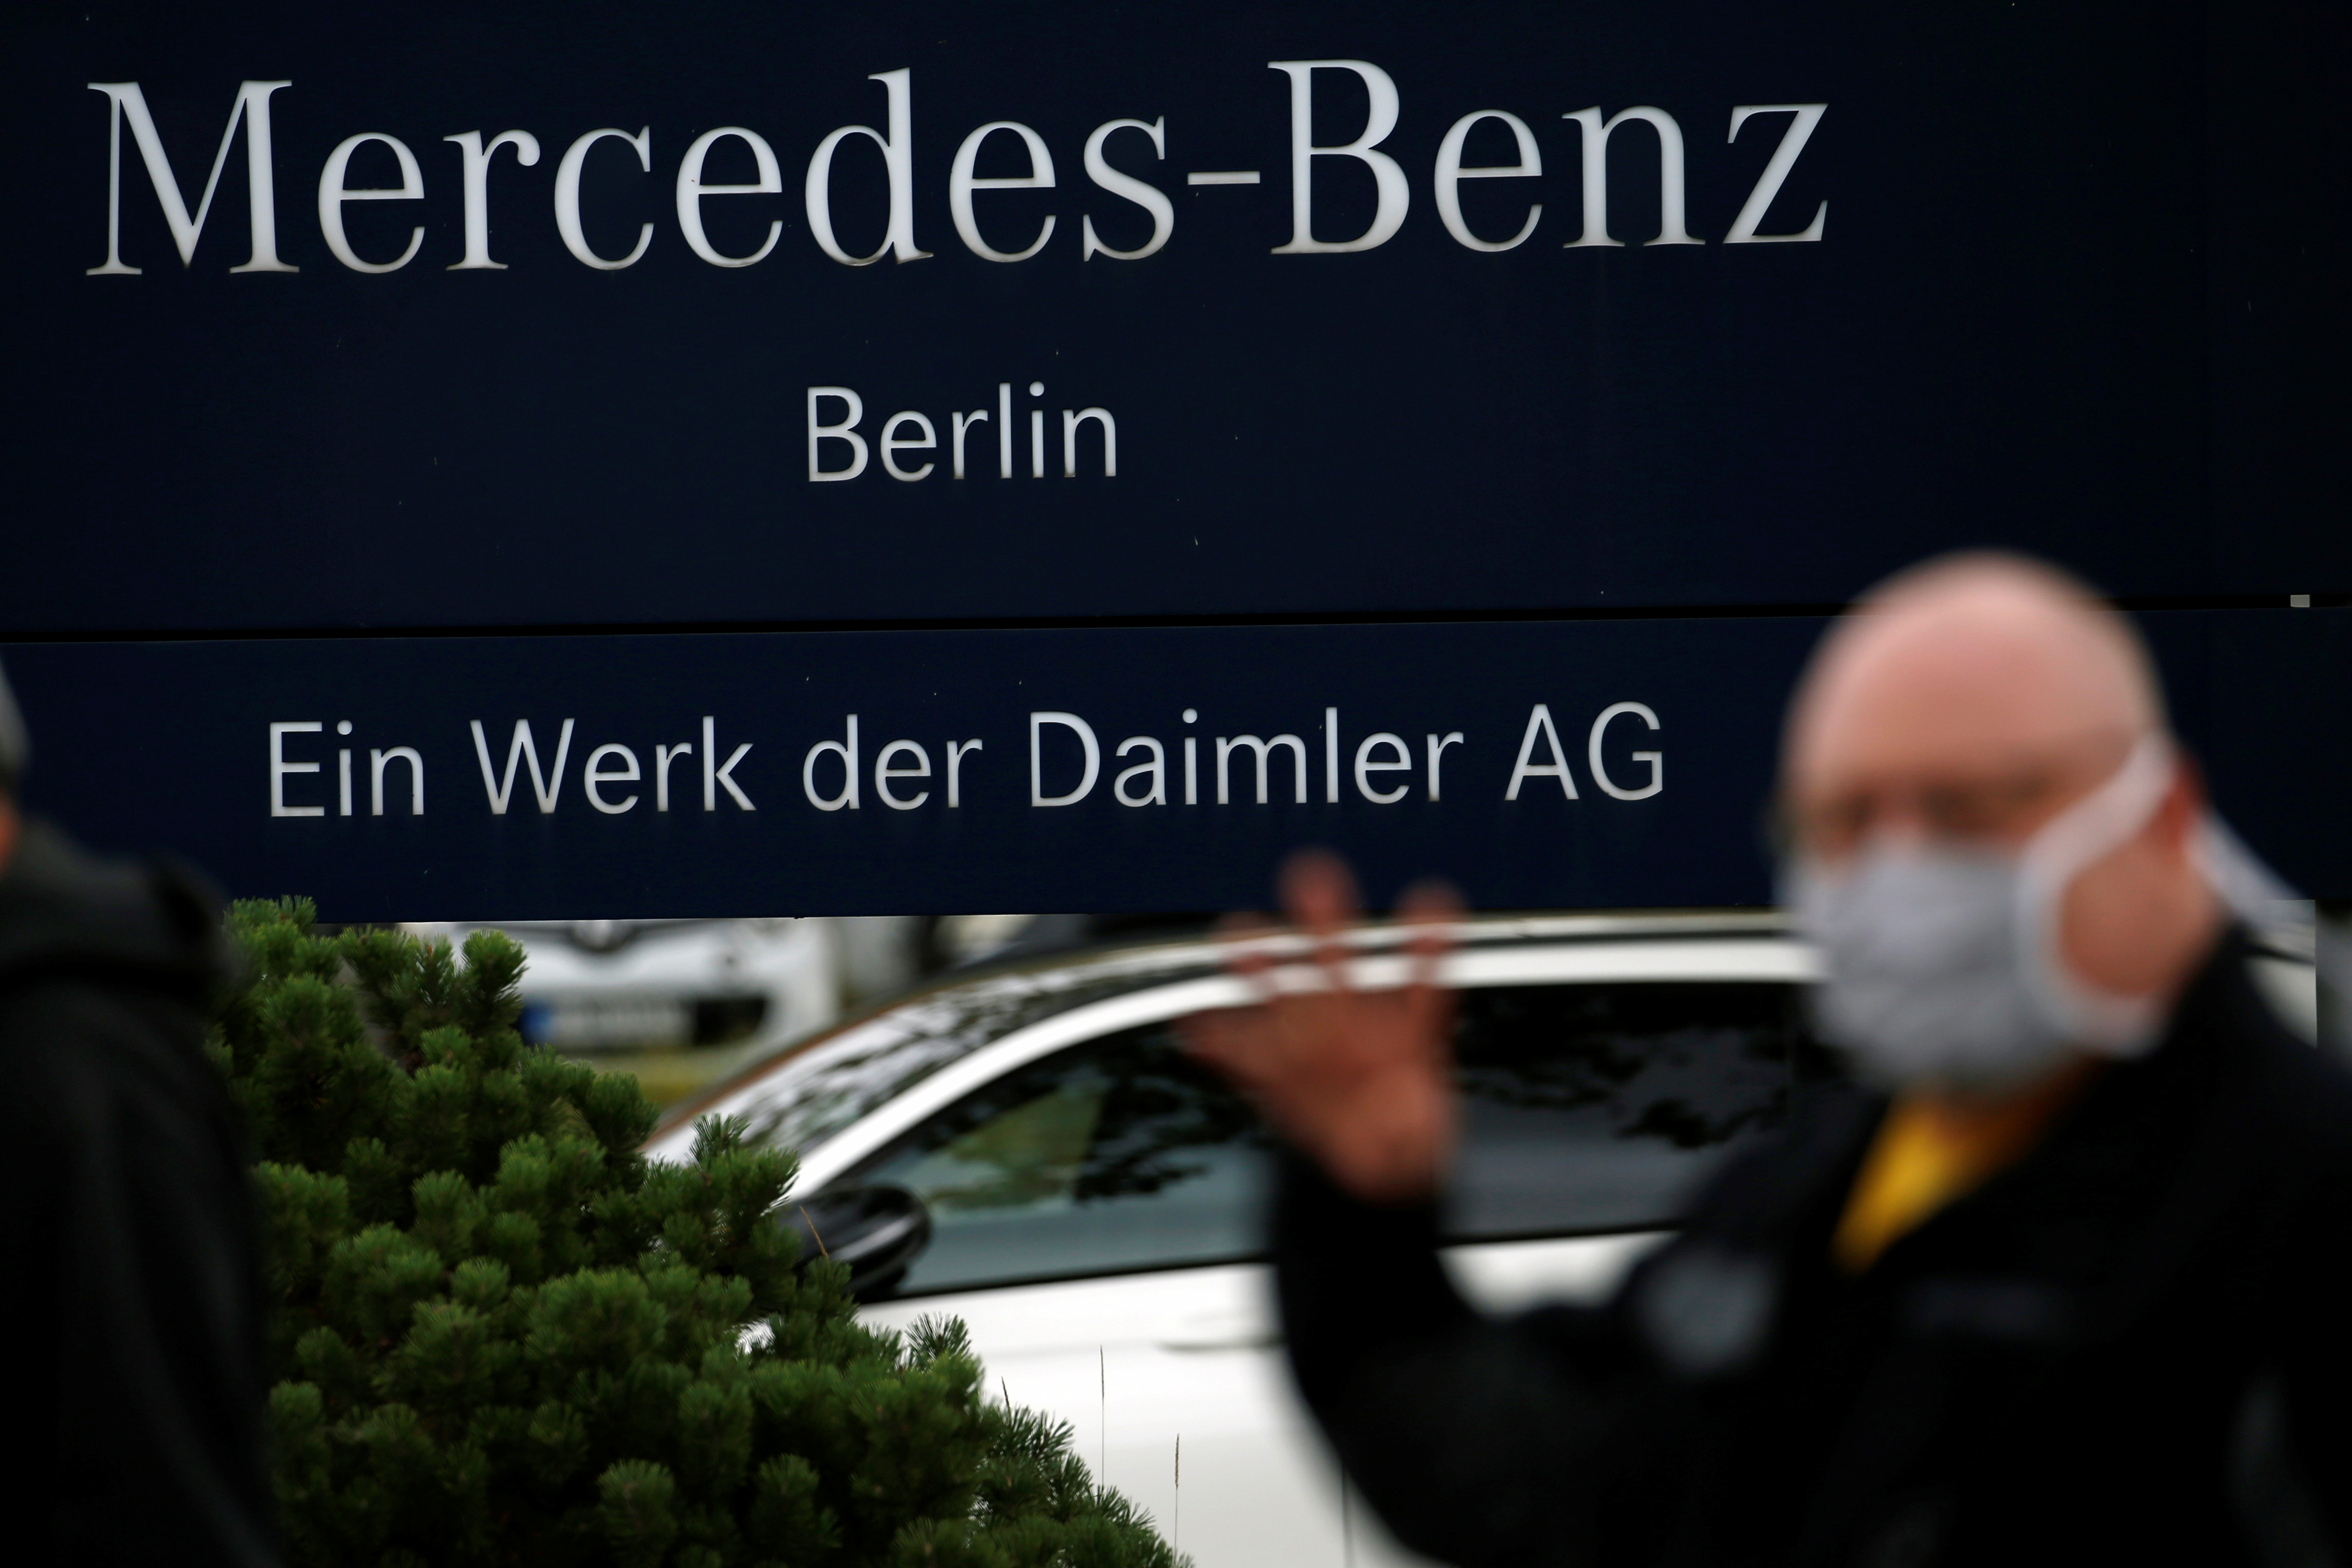 A Daimler AG employee arrives for a meeting at the Mercedes-Benz Plant at Marienfelde in Berlin. REUTERS/Michele Tantussi